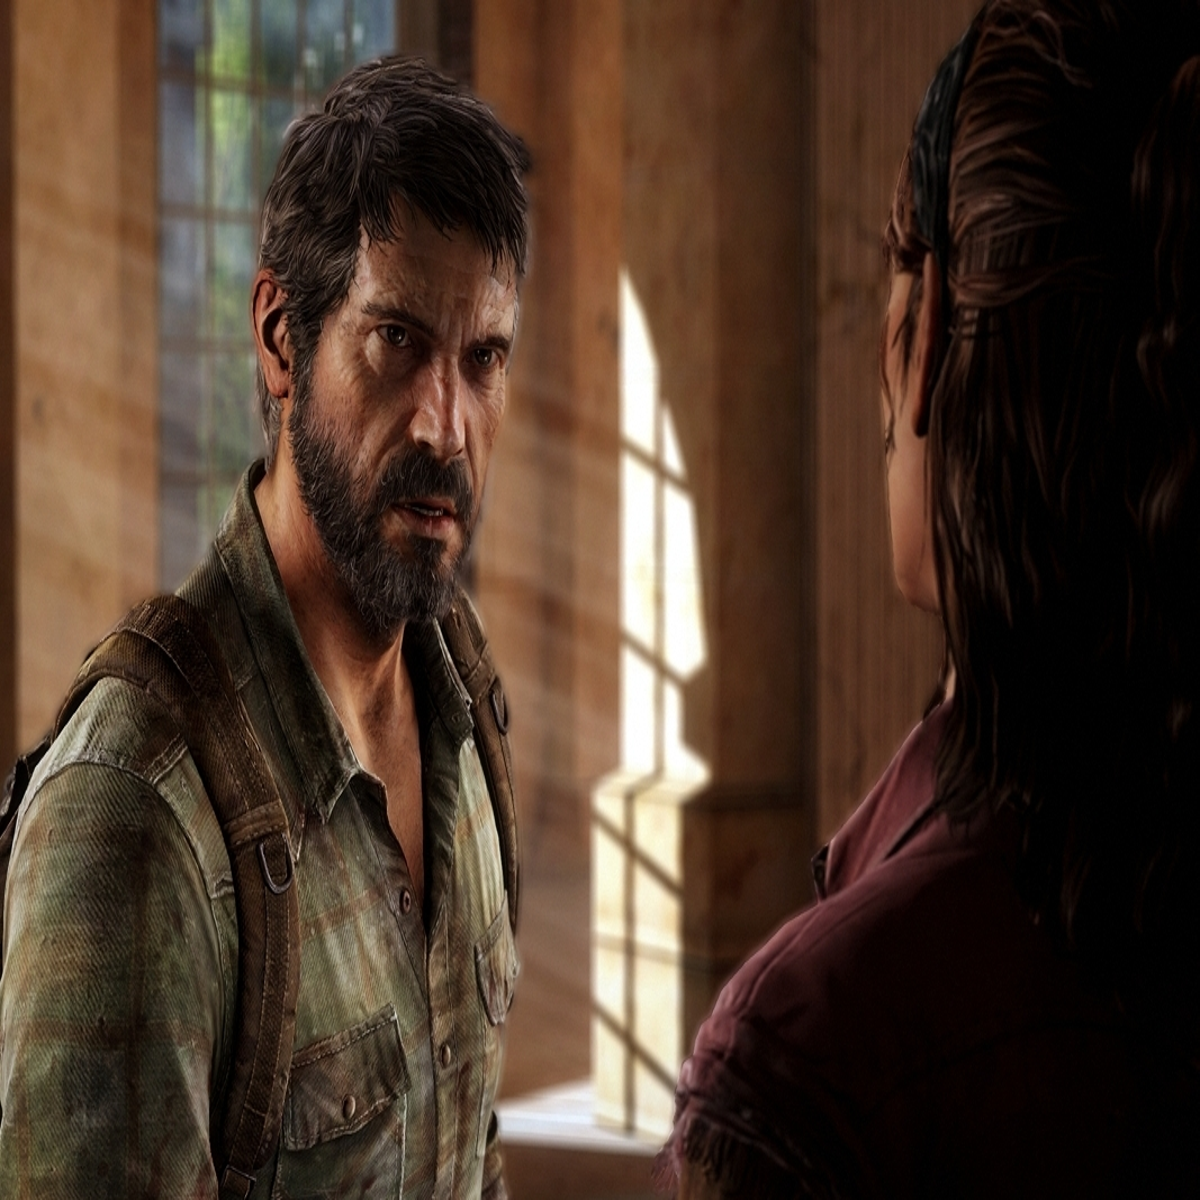 The Last of Us sells 6M copies on PlayStation 3